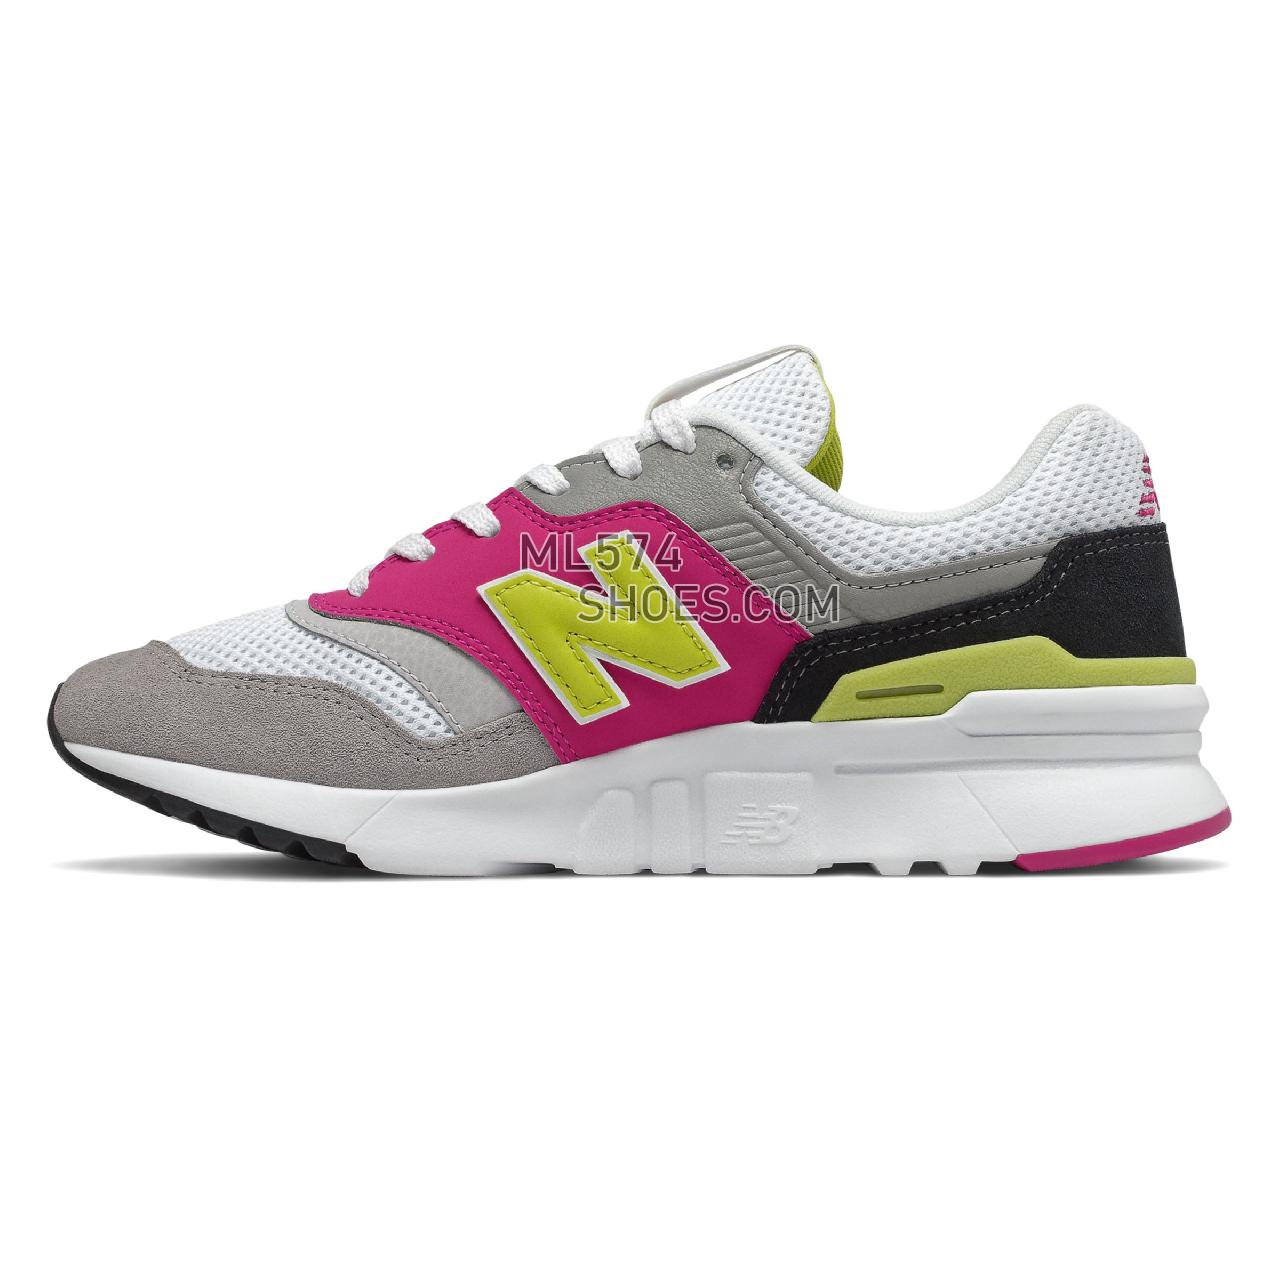 New Balance 997H - Women's Classic Sneakers - White with Pink and Yellow - CW997HNX